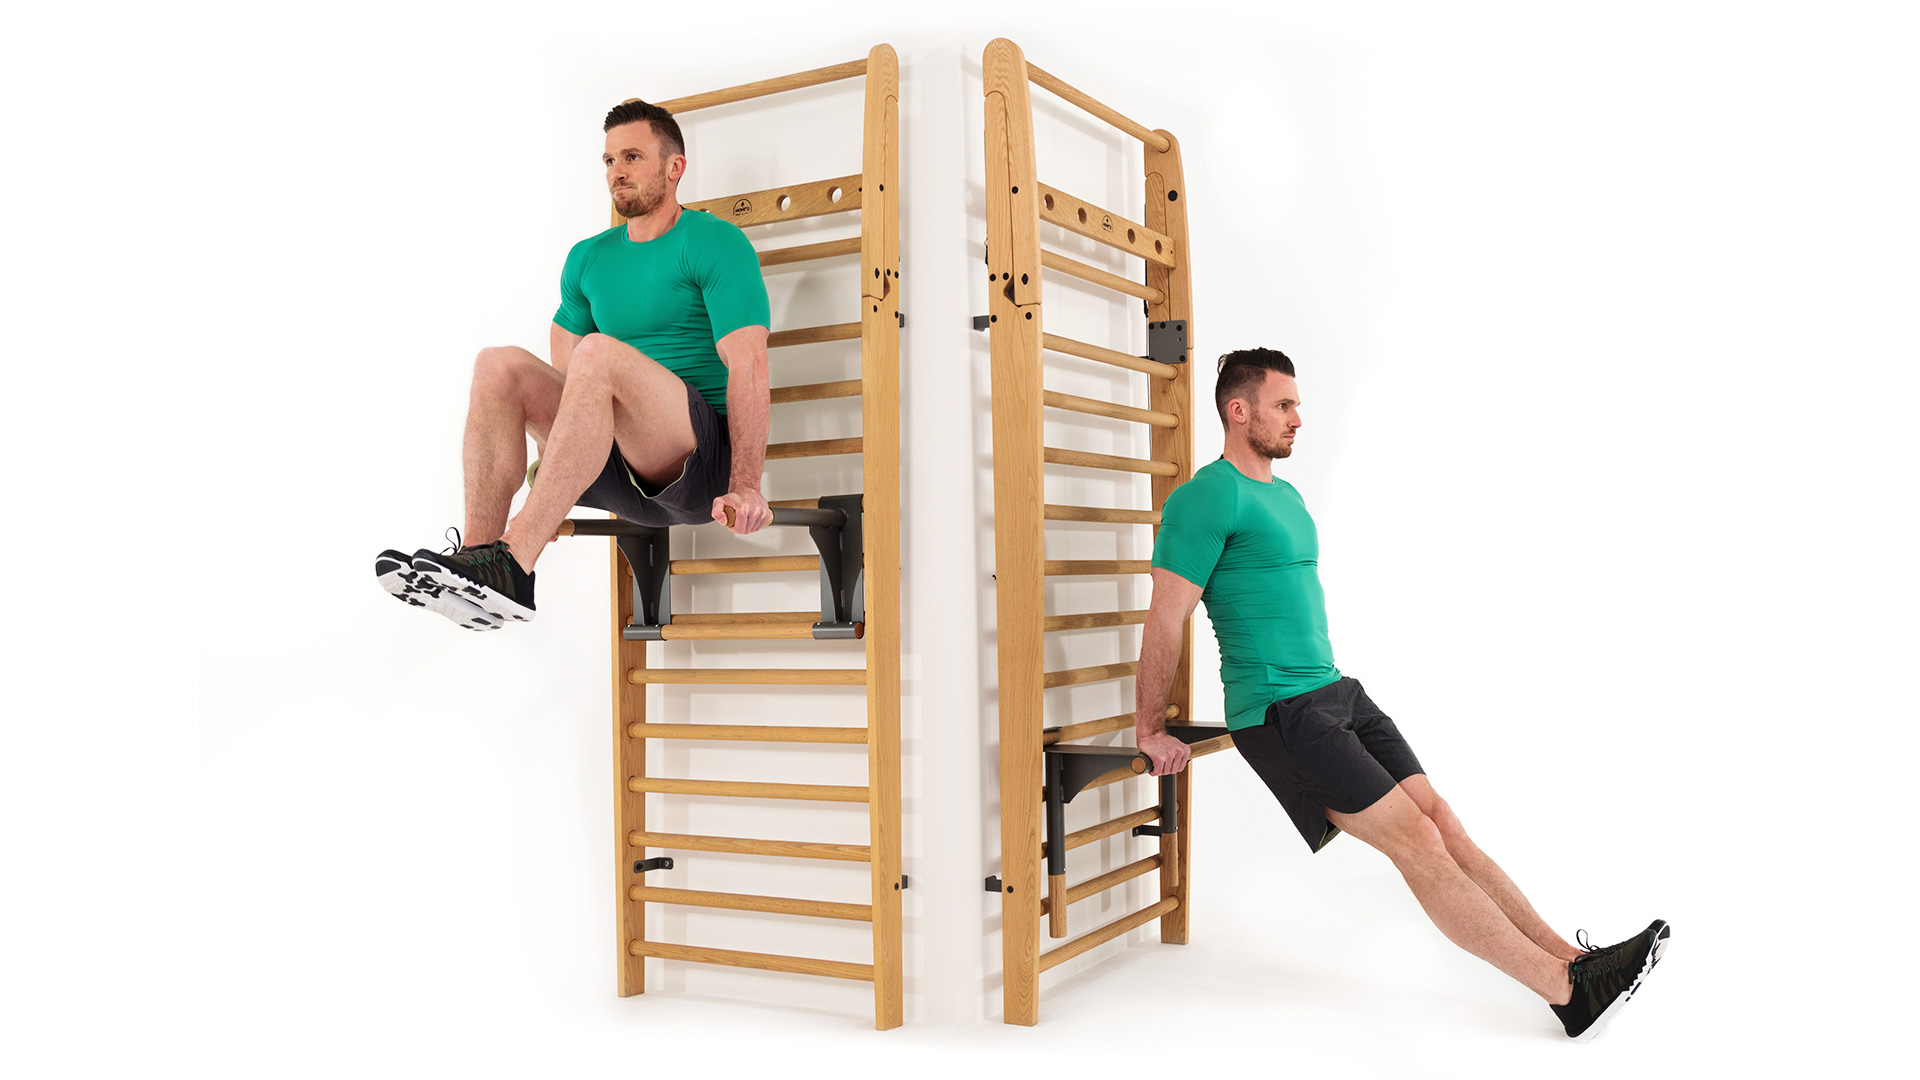 NOHrD WallBars - ideal for all areas of fitness training